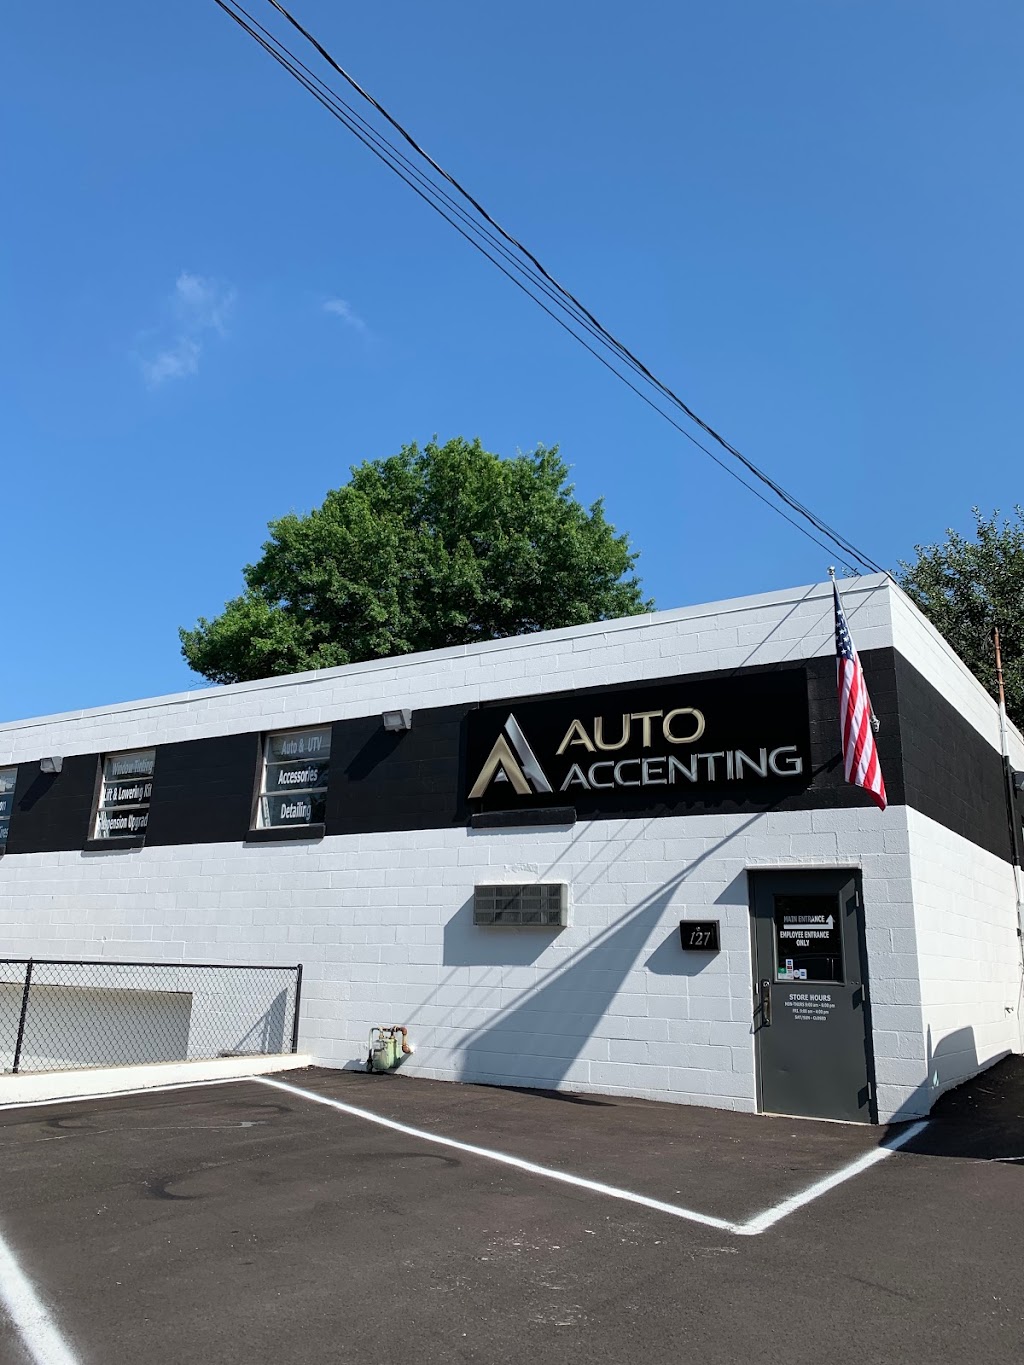 Auto Accenting | 127 E Beaver St, Zelienople, PA 16063 | Phone: (724) 900-0833